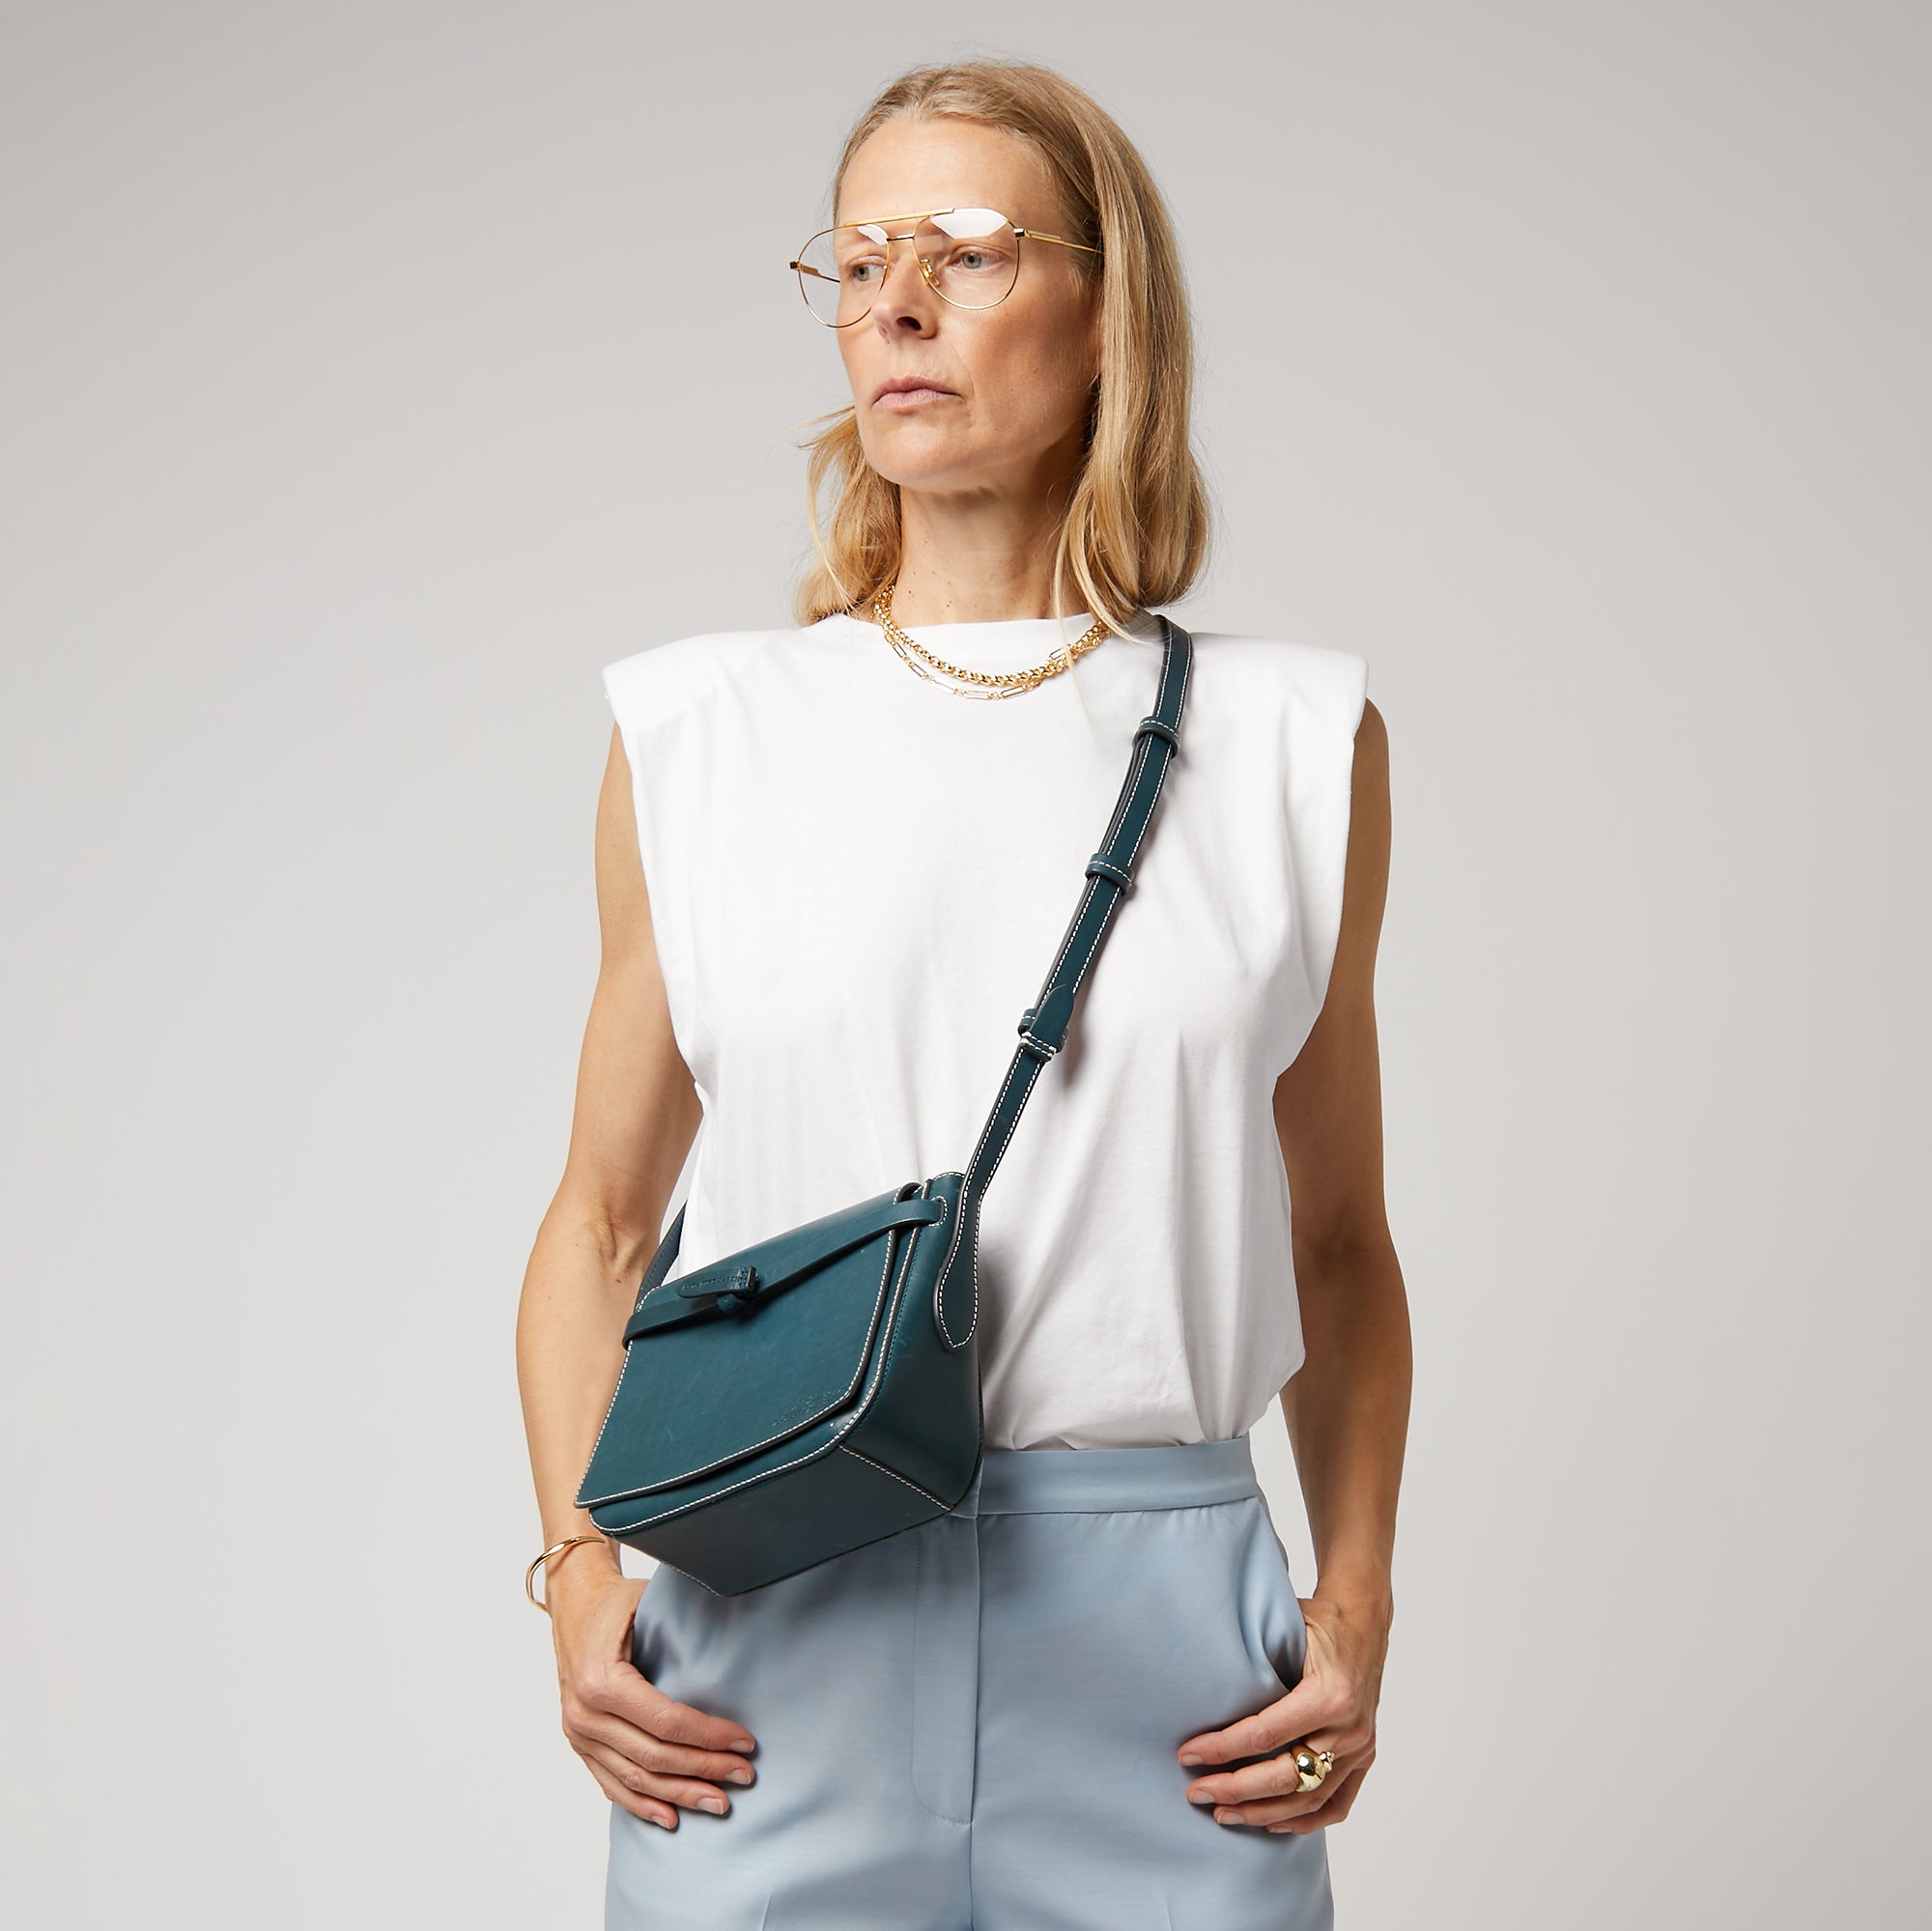 「Return to Nature」 クロスボディ -

                  
                    Compostable Leather in Dark Holly -
                  

                  Anya Hindmarch JP
